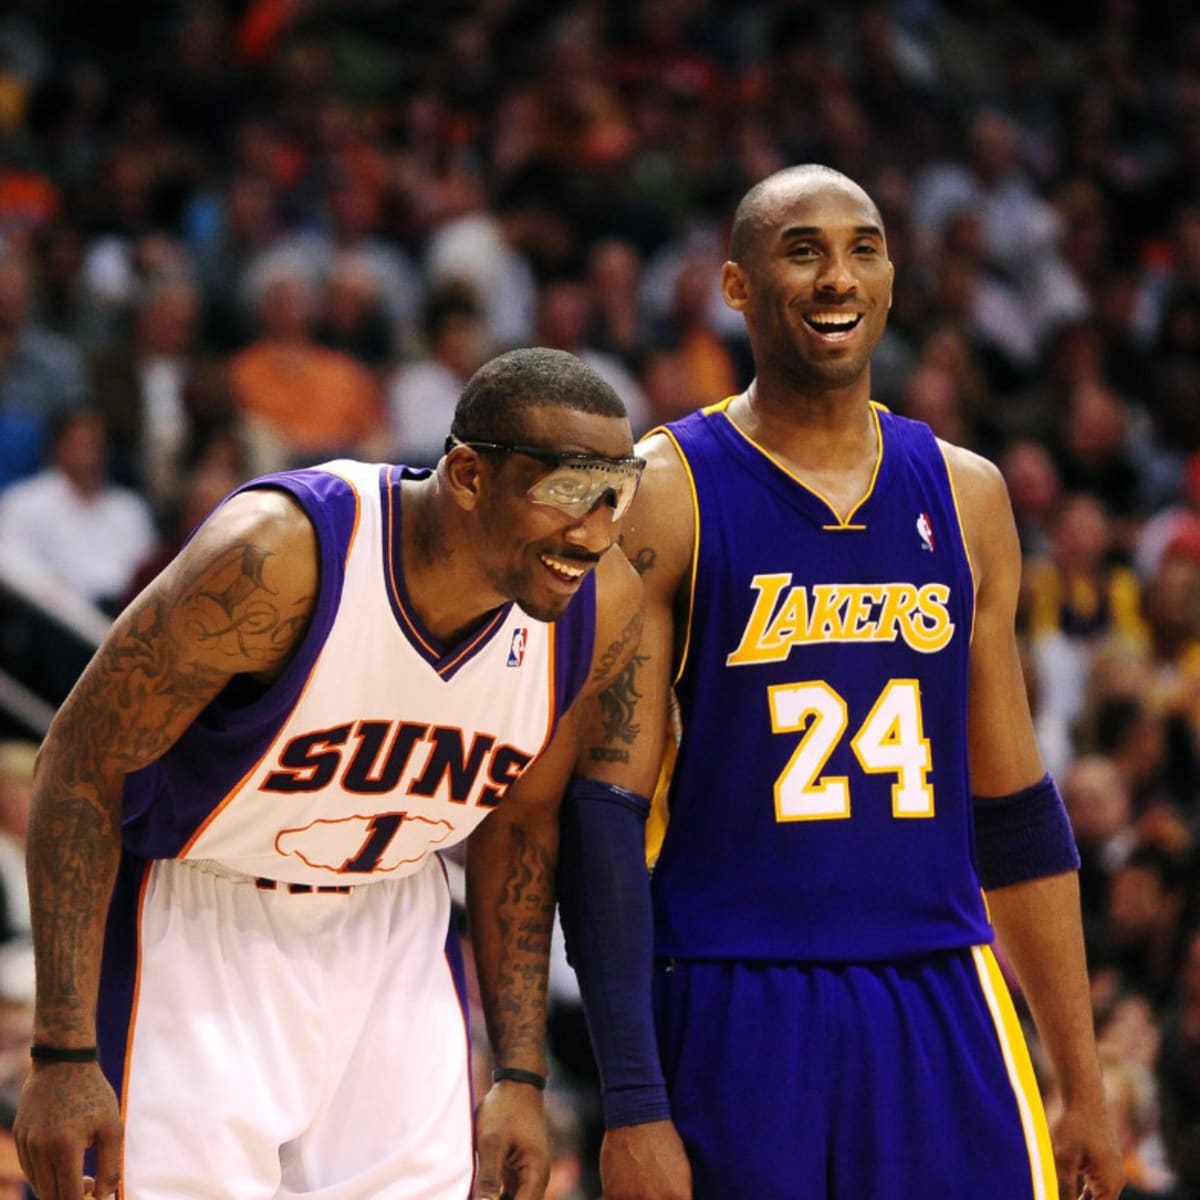 Dates for Suns' Marion, Stoudemire Ring of Honor inductions